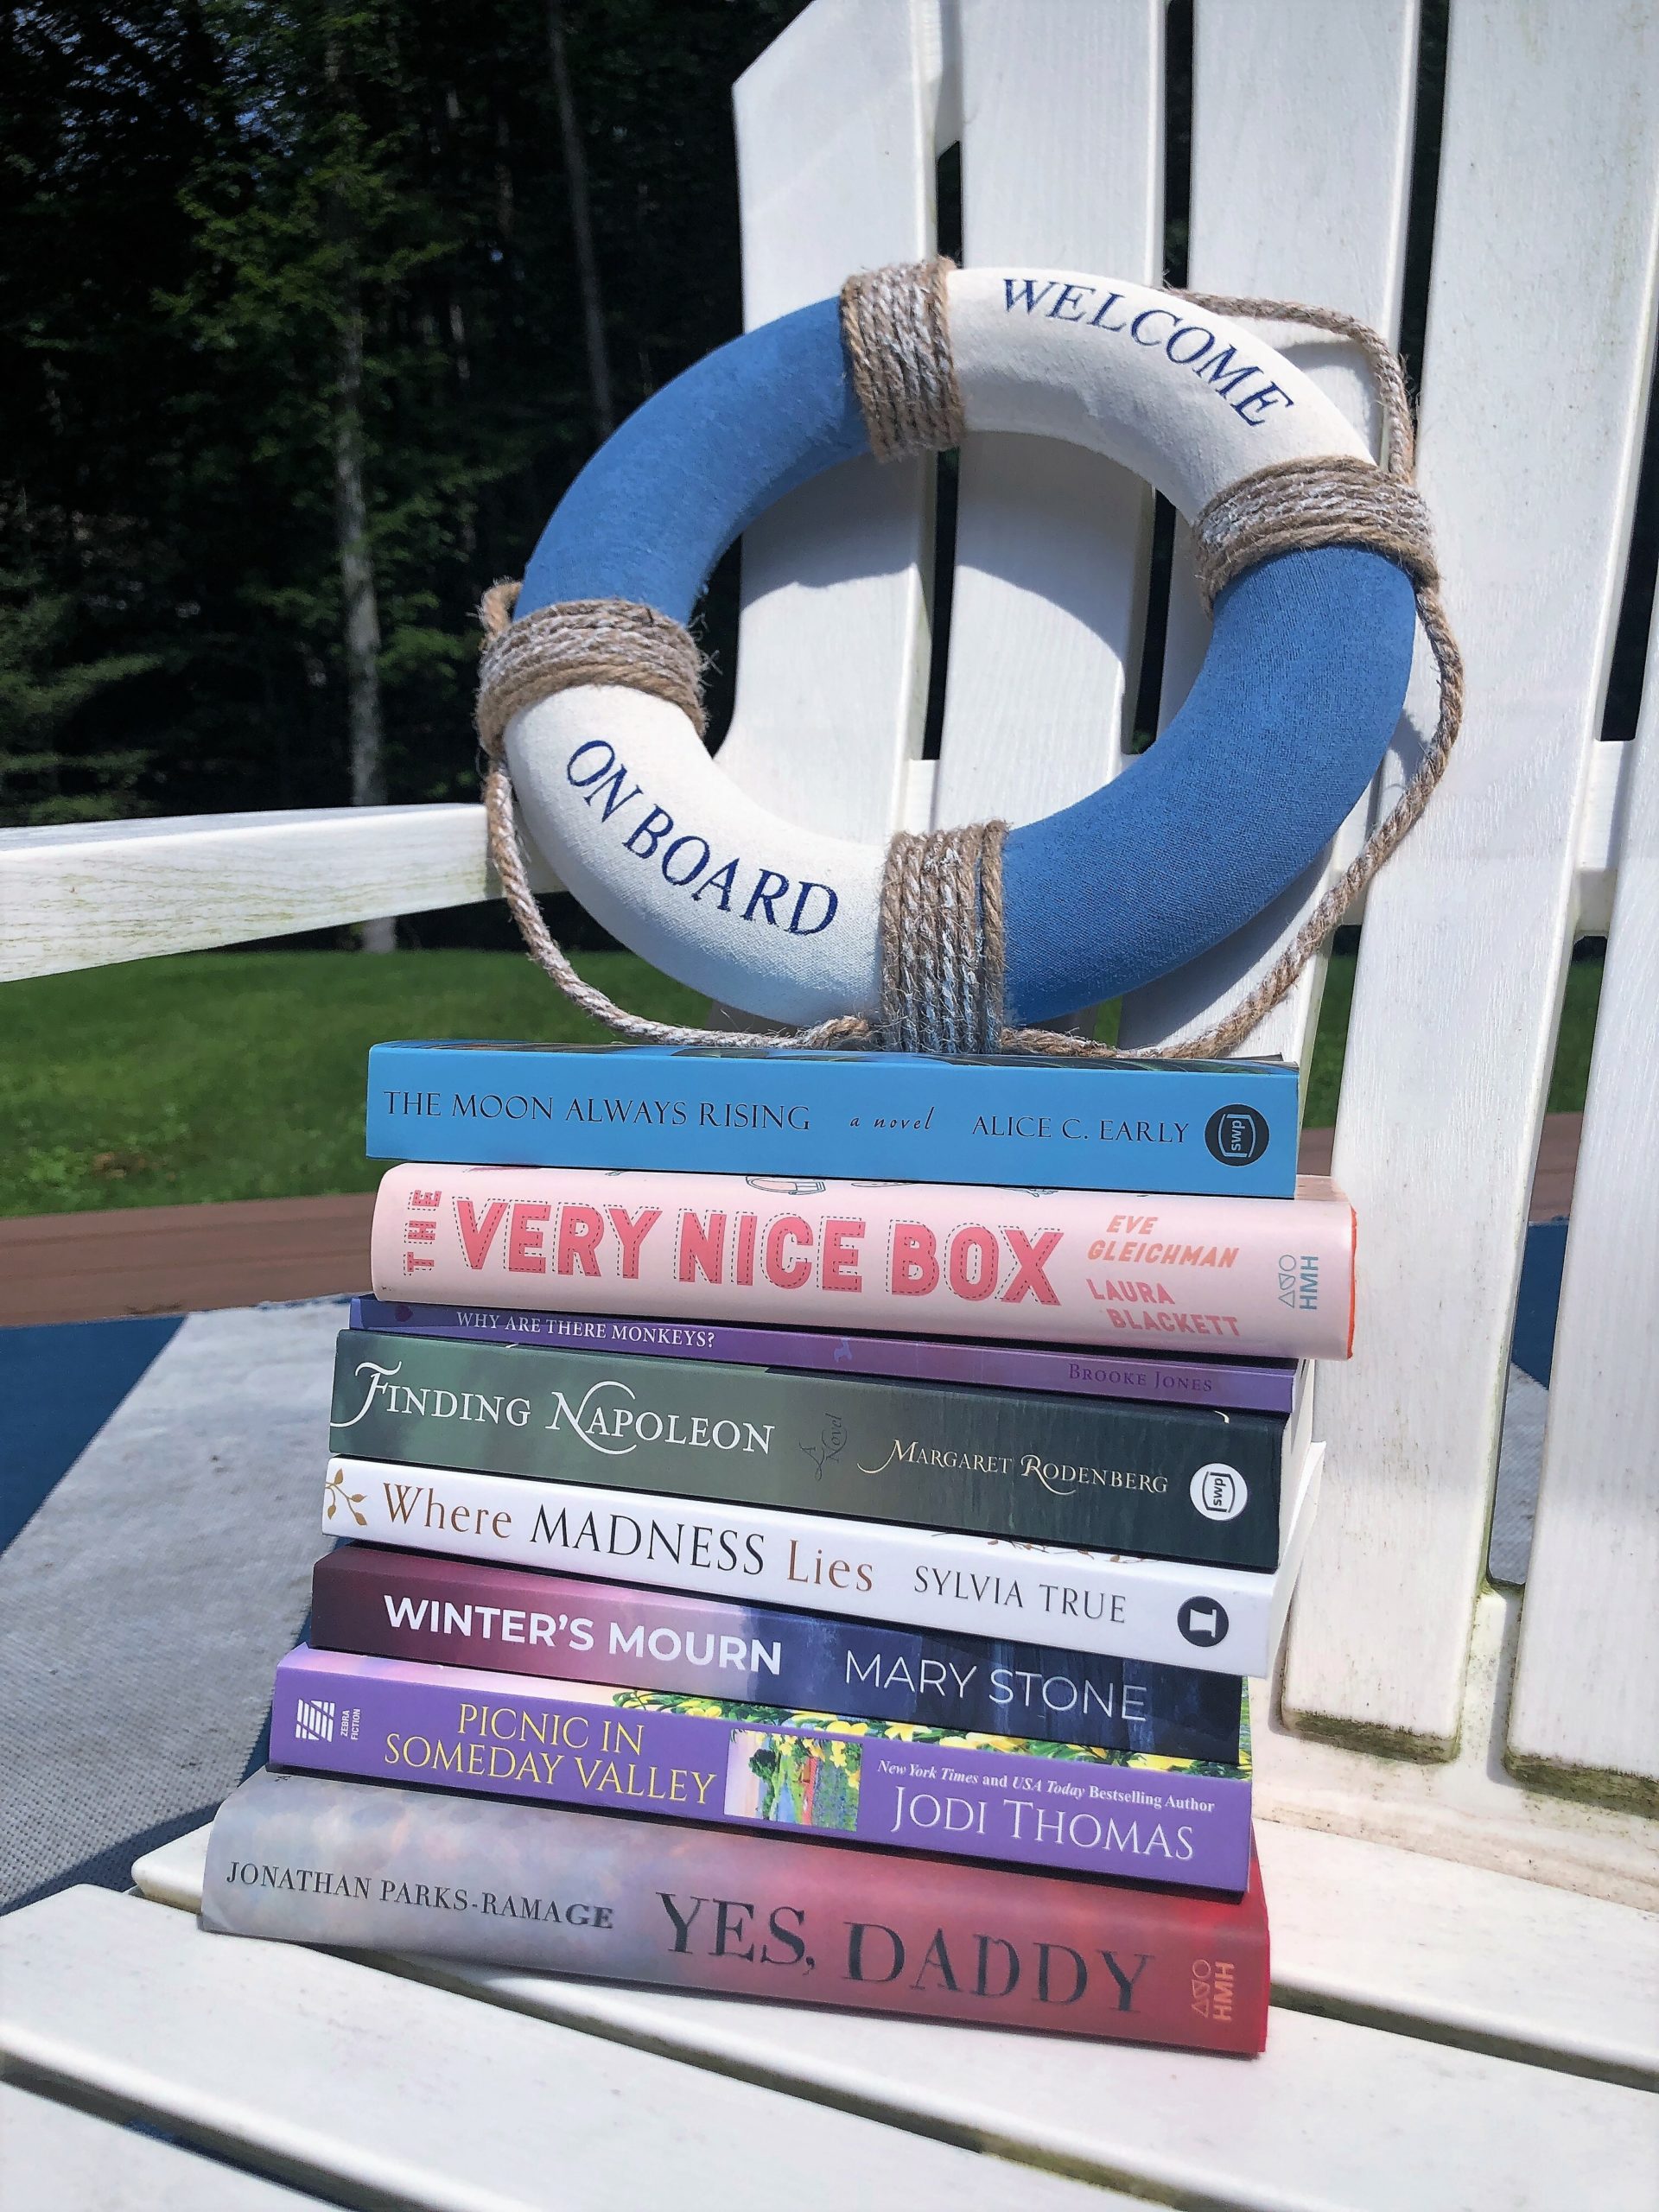 The Bedside Reading book selection for July 23.